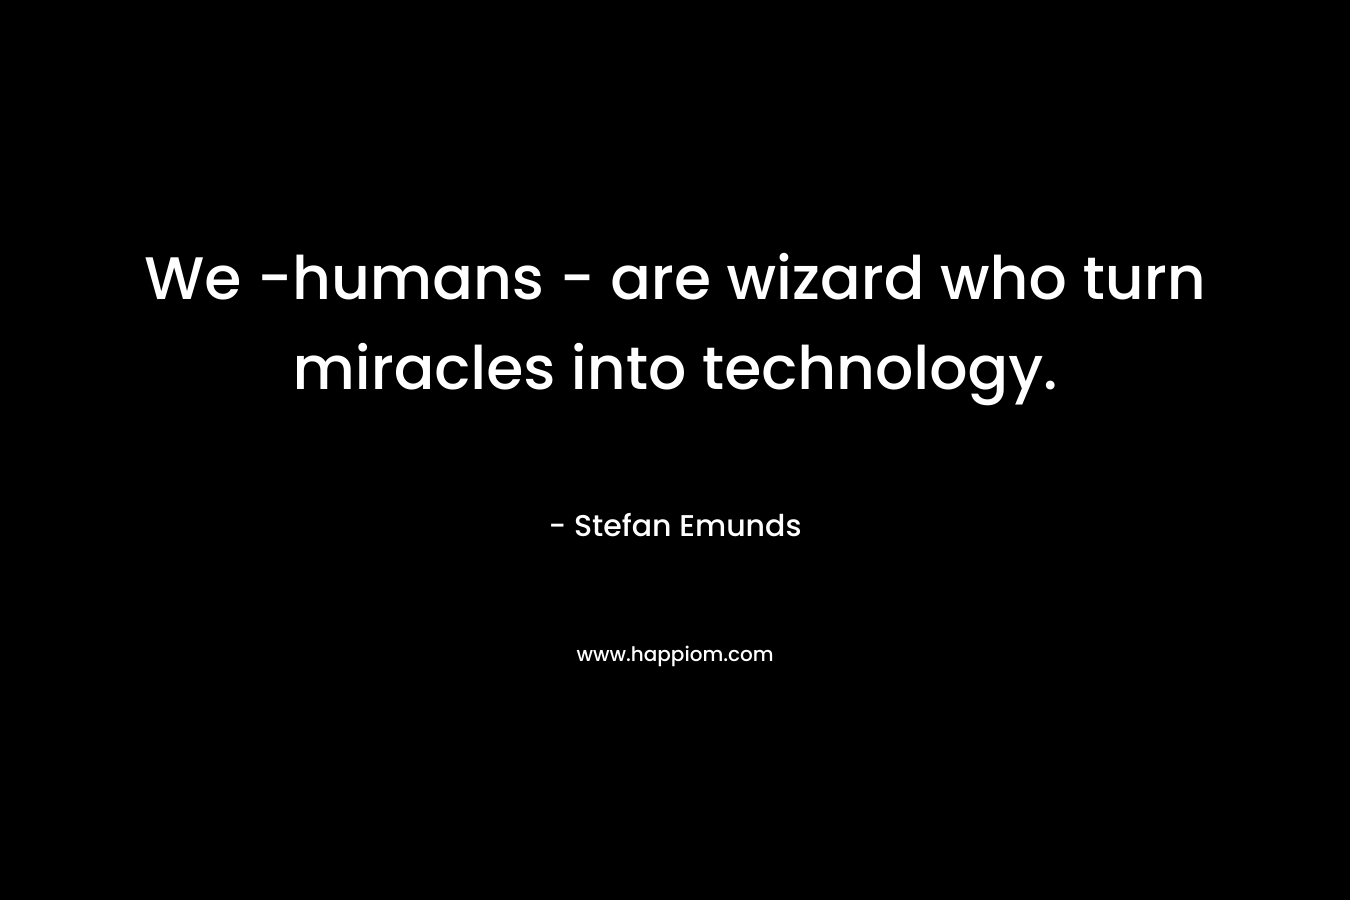 We -humans - are wizard who turn miracles into technology.